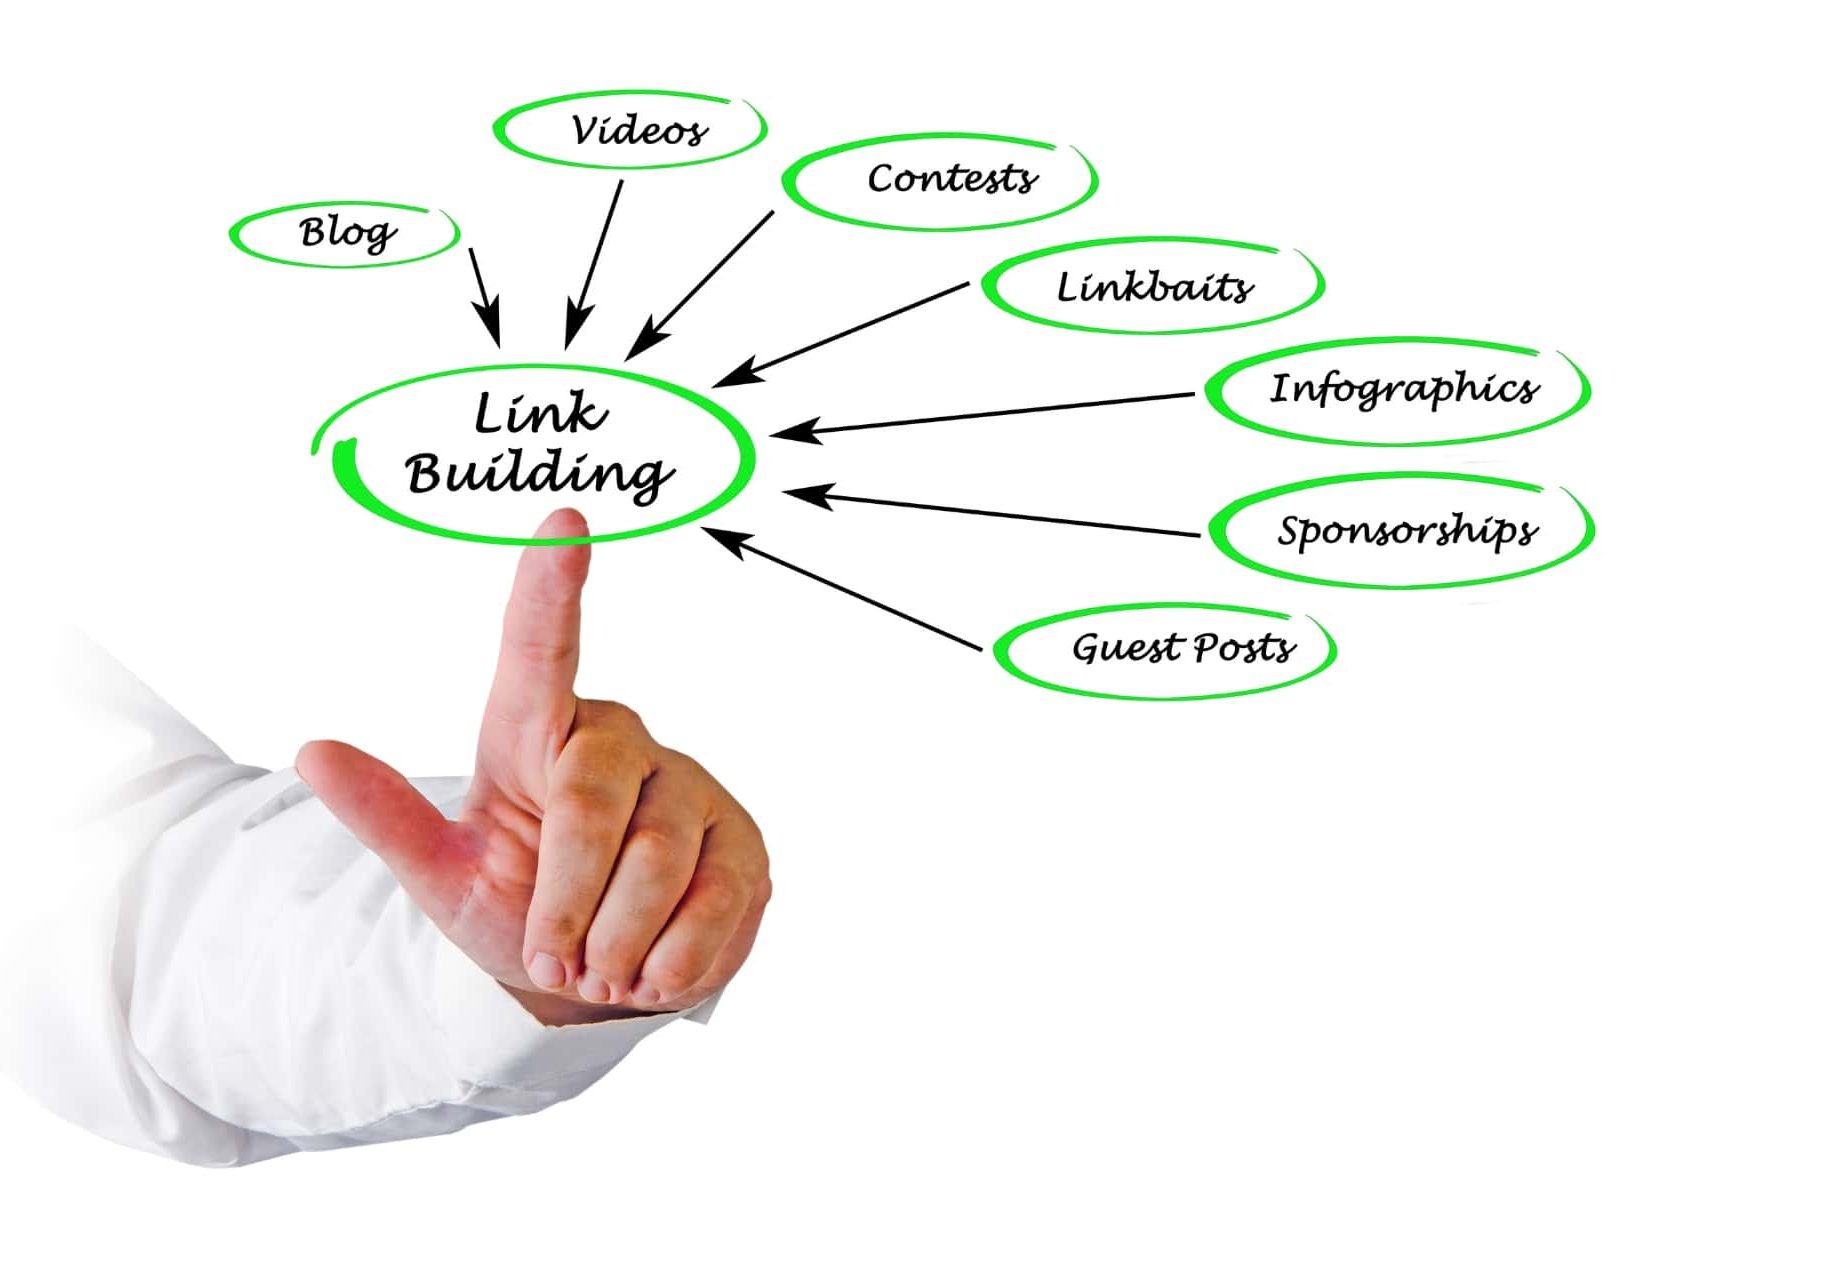 Link Building Boost Your Website's Authority and Traffic